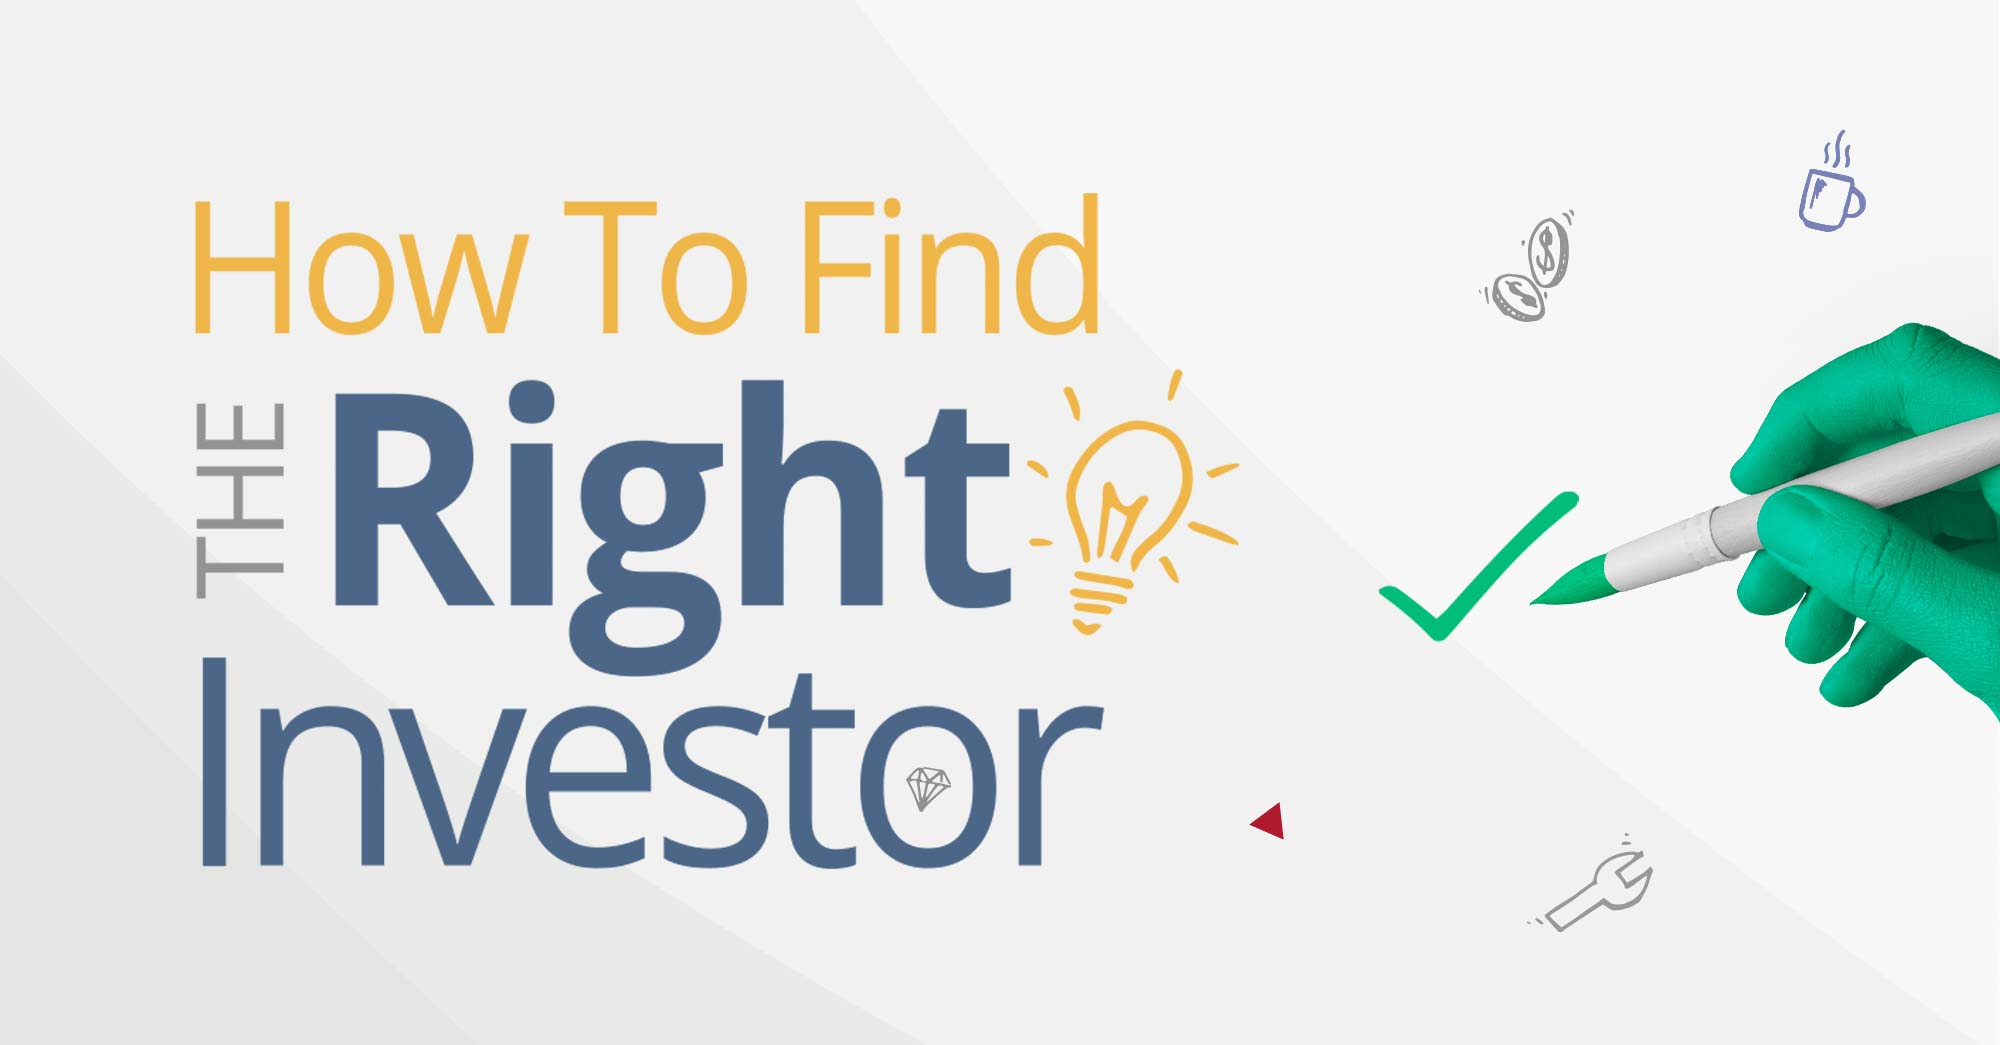 The beginner’s guide to finding the right investor for your company